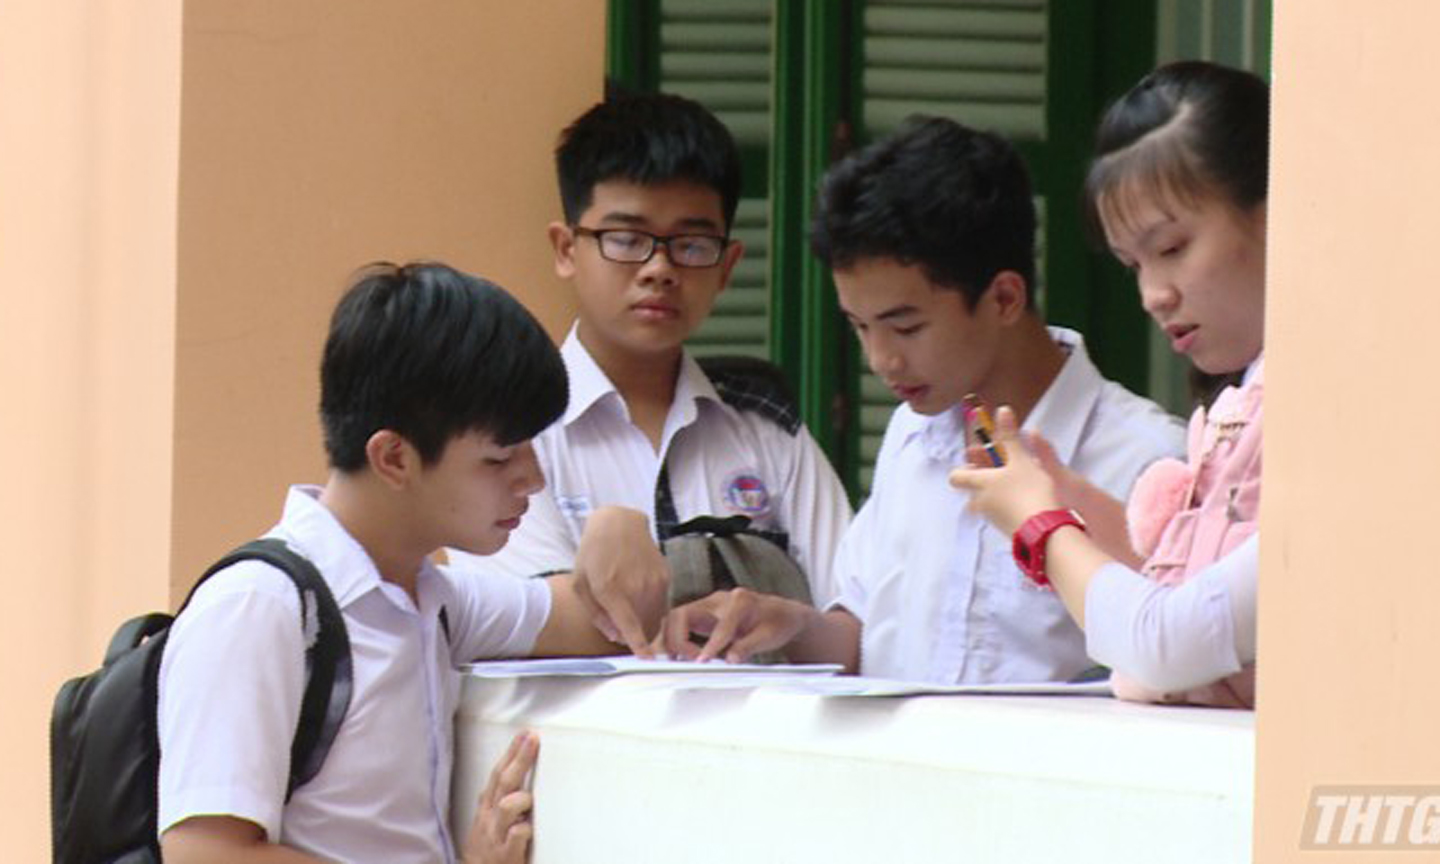 Parents and students is viewing the examination results at Nguyen Dinh Chieu High School. Photo: DO PHI